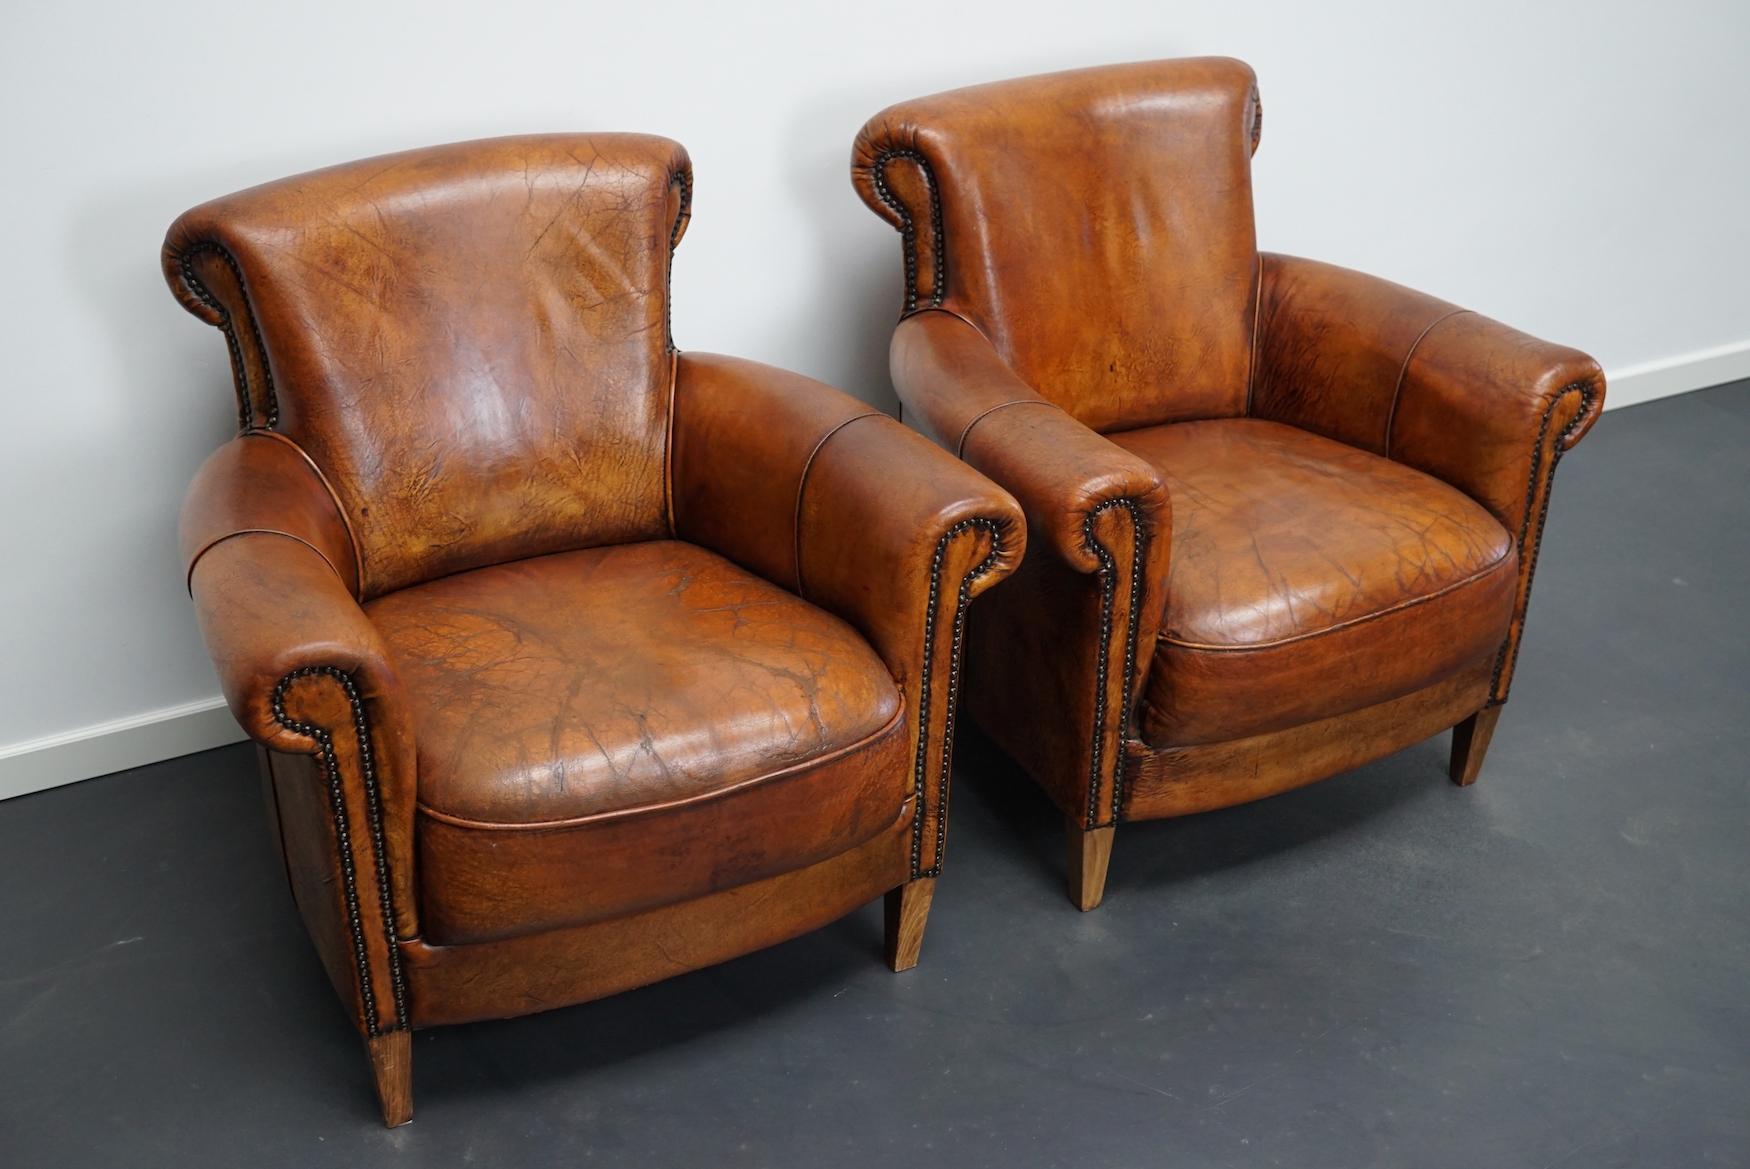 This pair of cognac-colored leather club chairs come from the Netherlands. They are upholstered with cognac-colored leather and feature metal rivets and wooden legs.
Details.
 